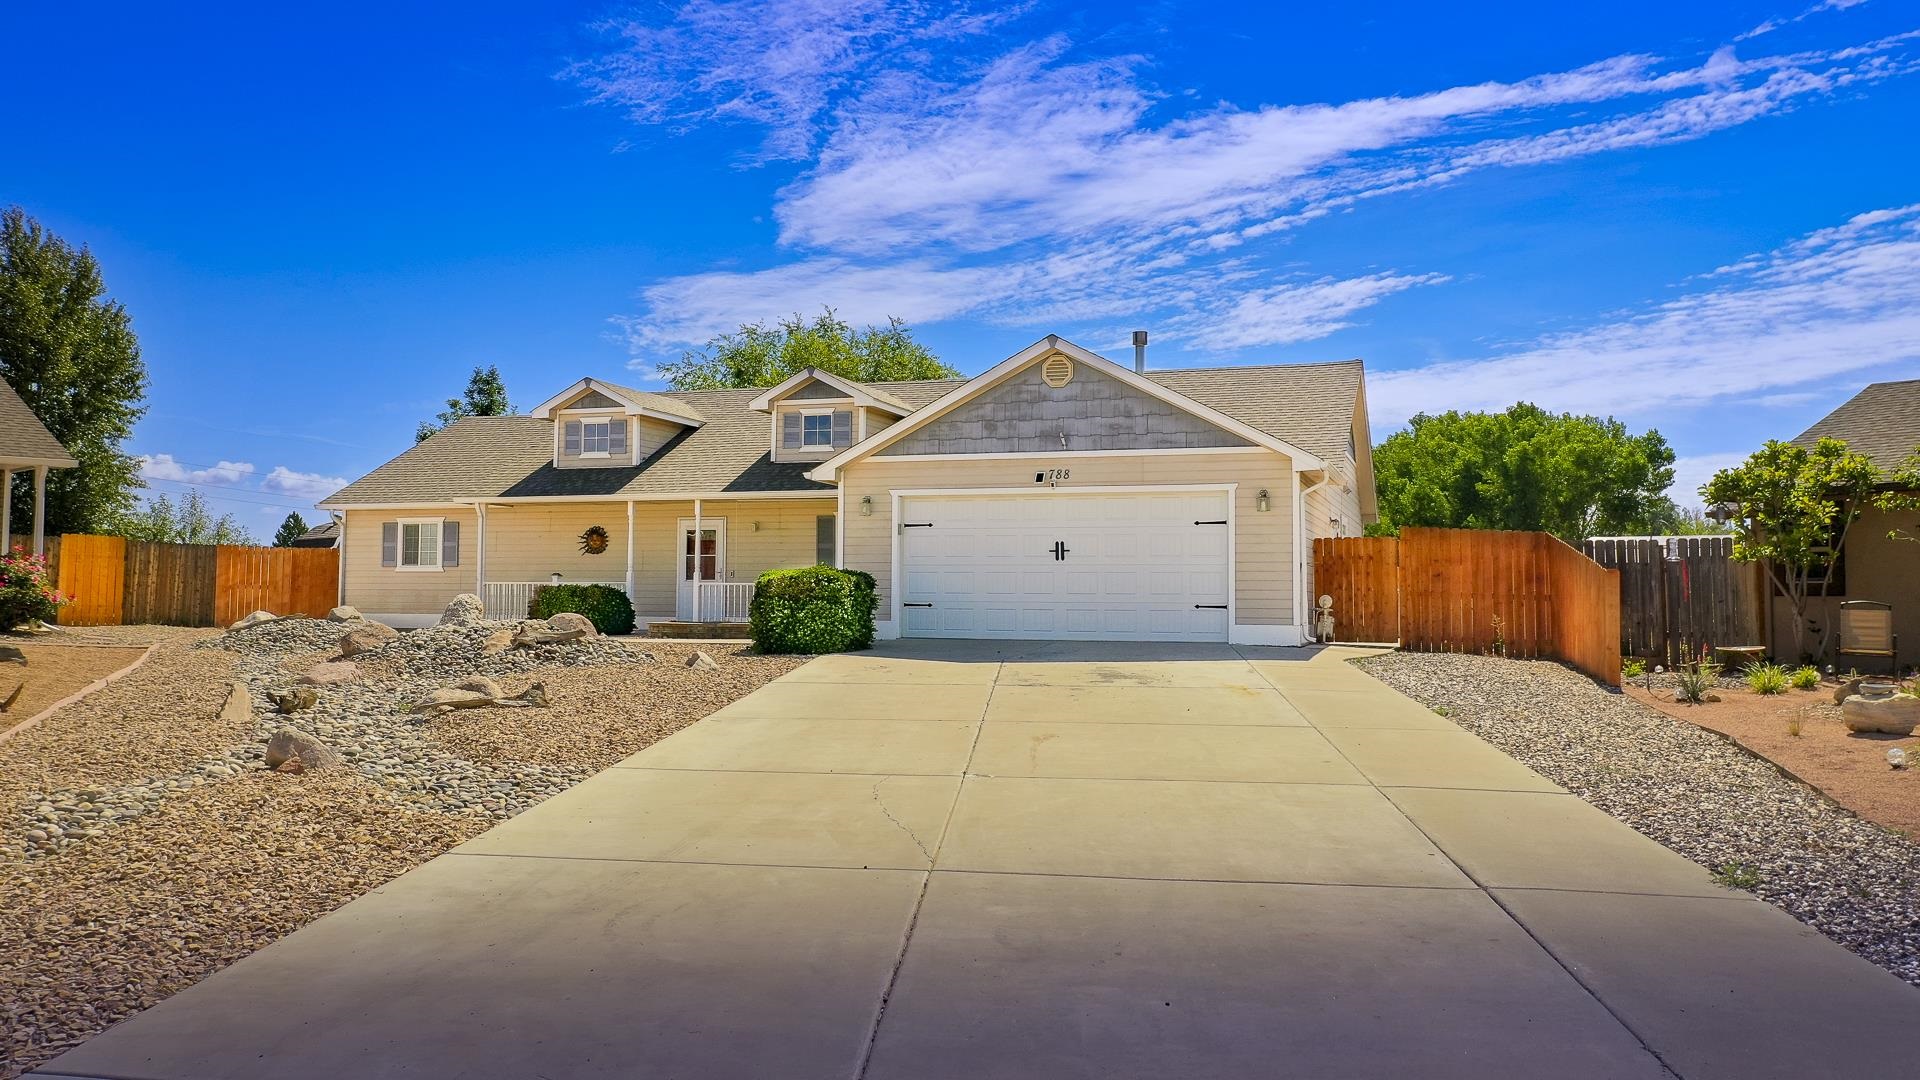 Great Fruita home that is move in ready!! You are going to love this open concept, split bed design home that features 3 beds, 2 baths & 2 car garage w/ 1640 sq ft of living space. Huge master suite w/ 5 pc bath & large walk in closet. Outside you will find a spacious yard w/ great views, storage shed, fully fenced & mature landscaping. Close to everything & ready for new owner!